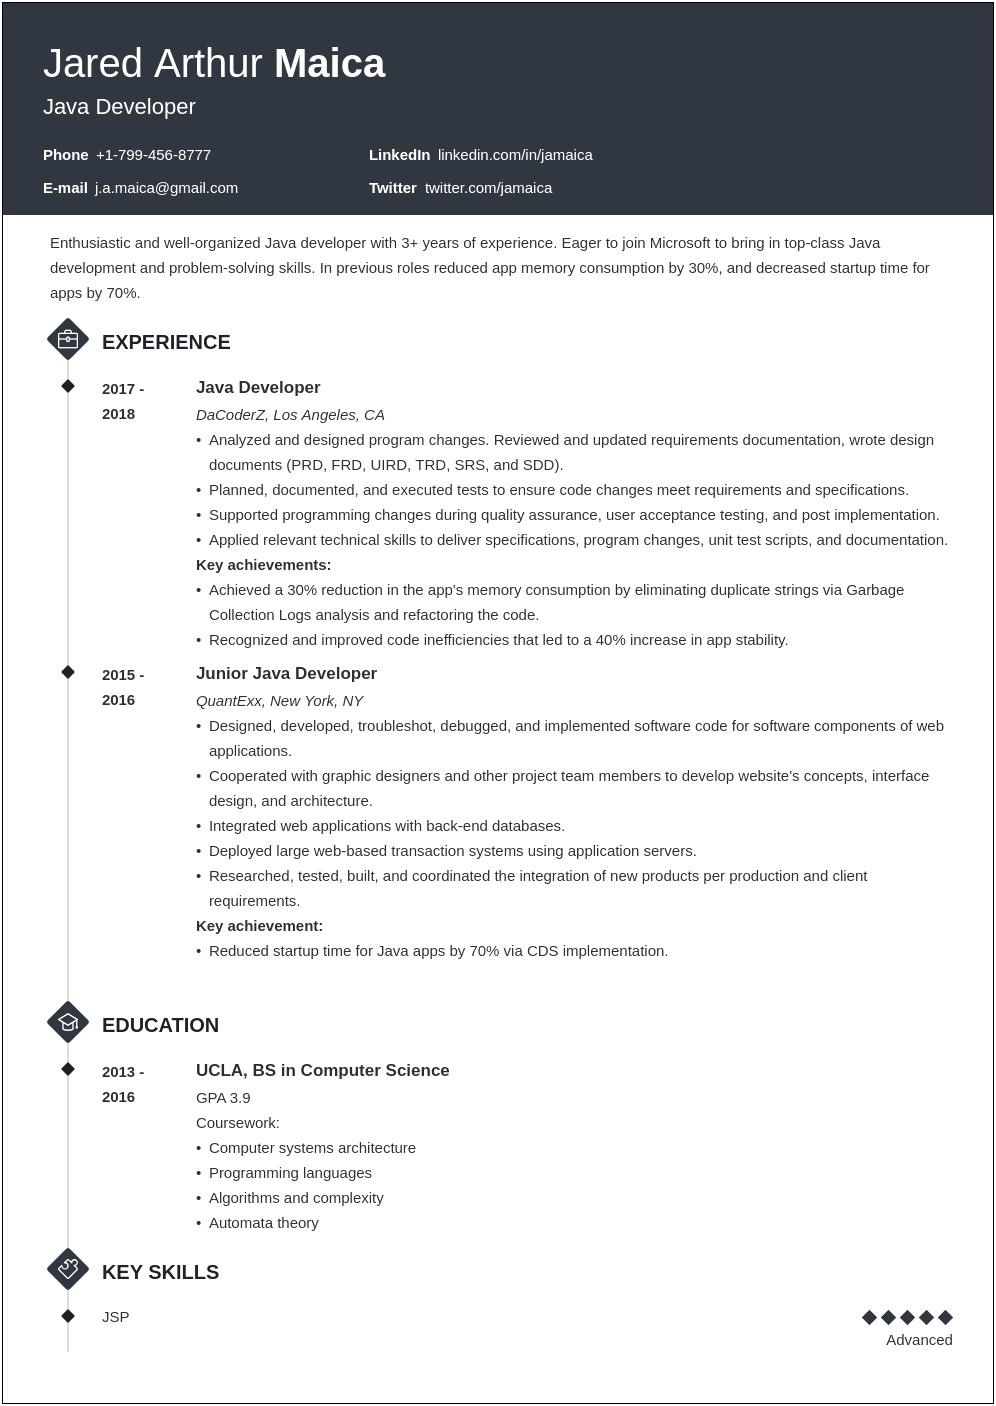 Oracle Developer Resume For 3 Years Experience